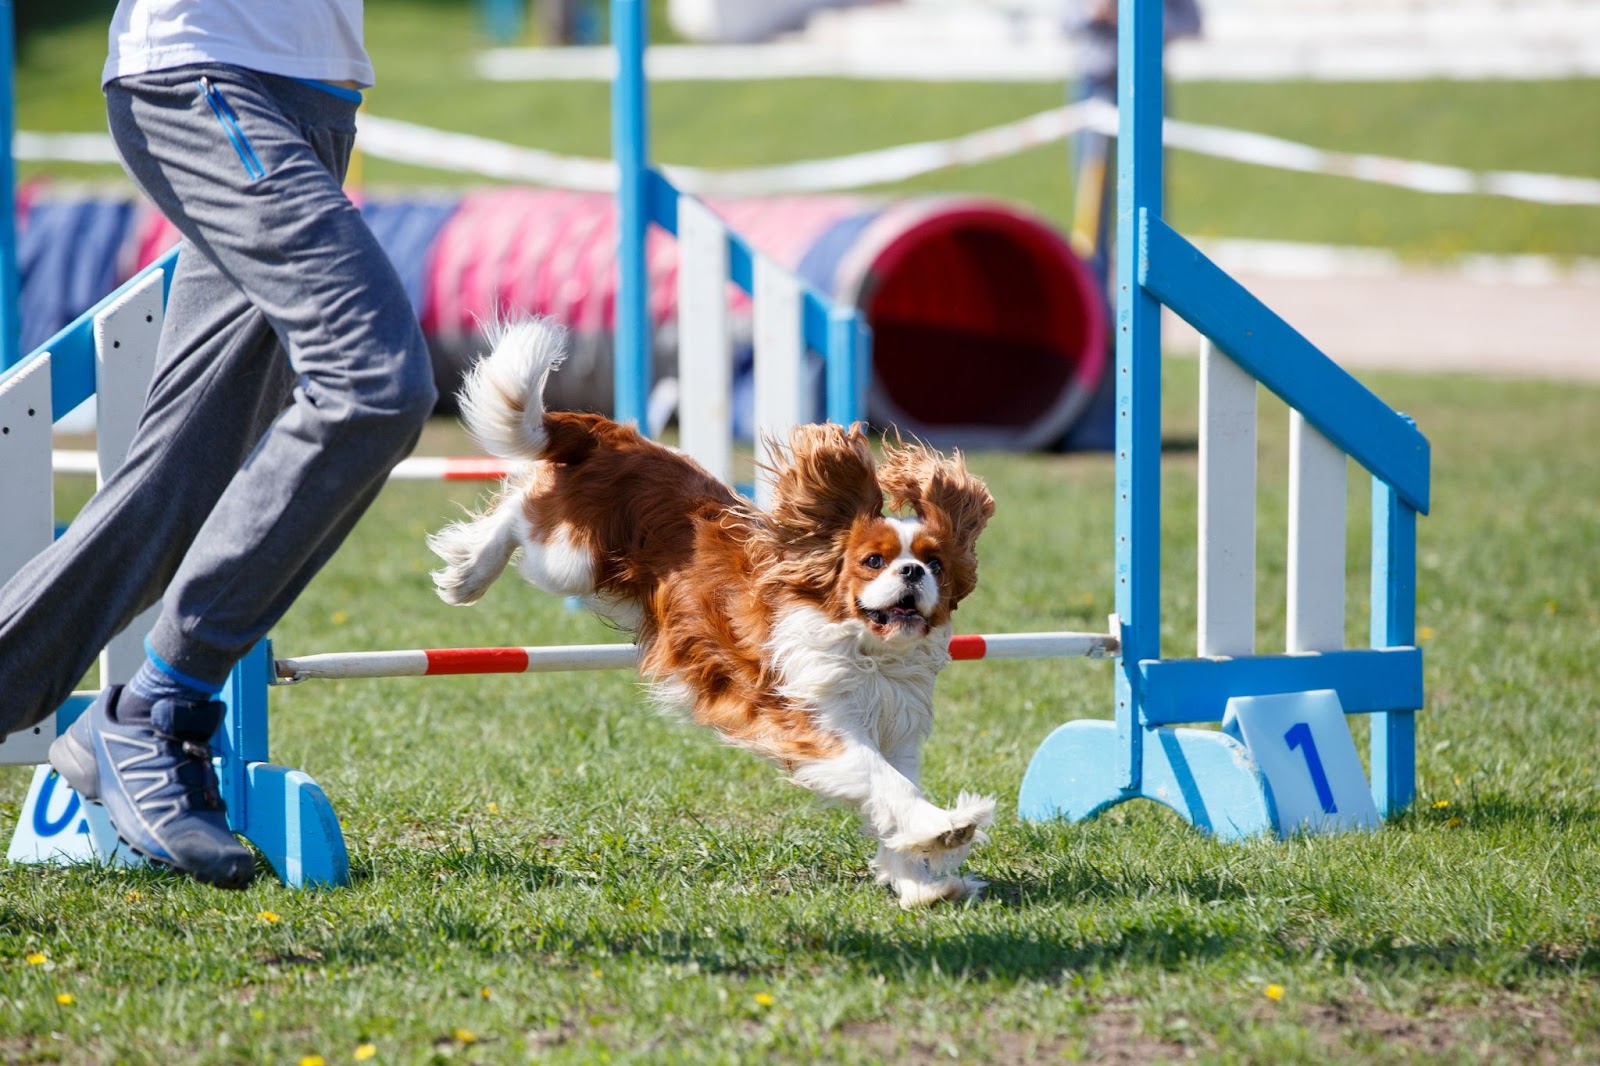 Brown and white cocker spaniel dog running on obstacle course with owner